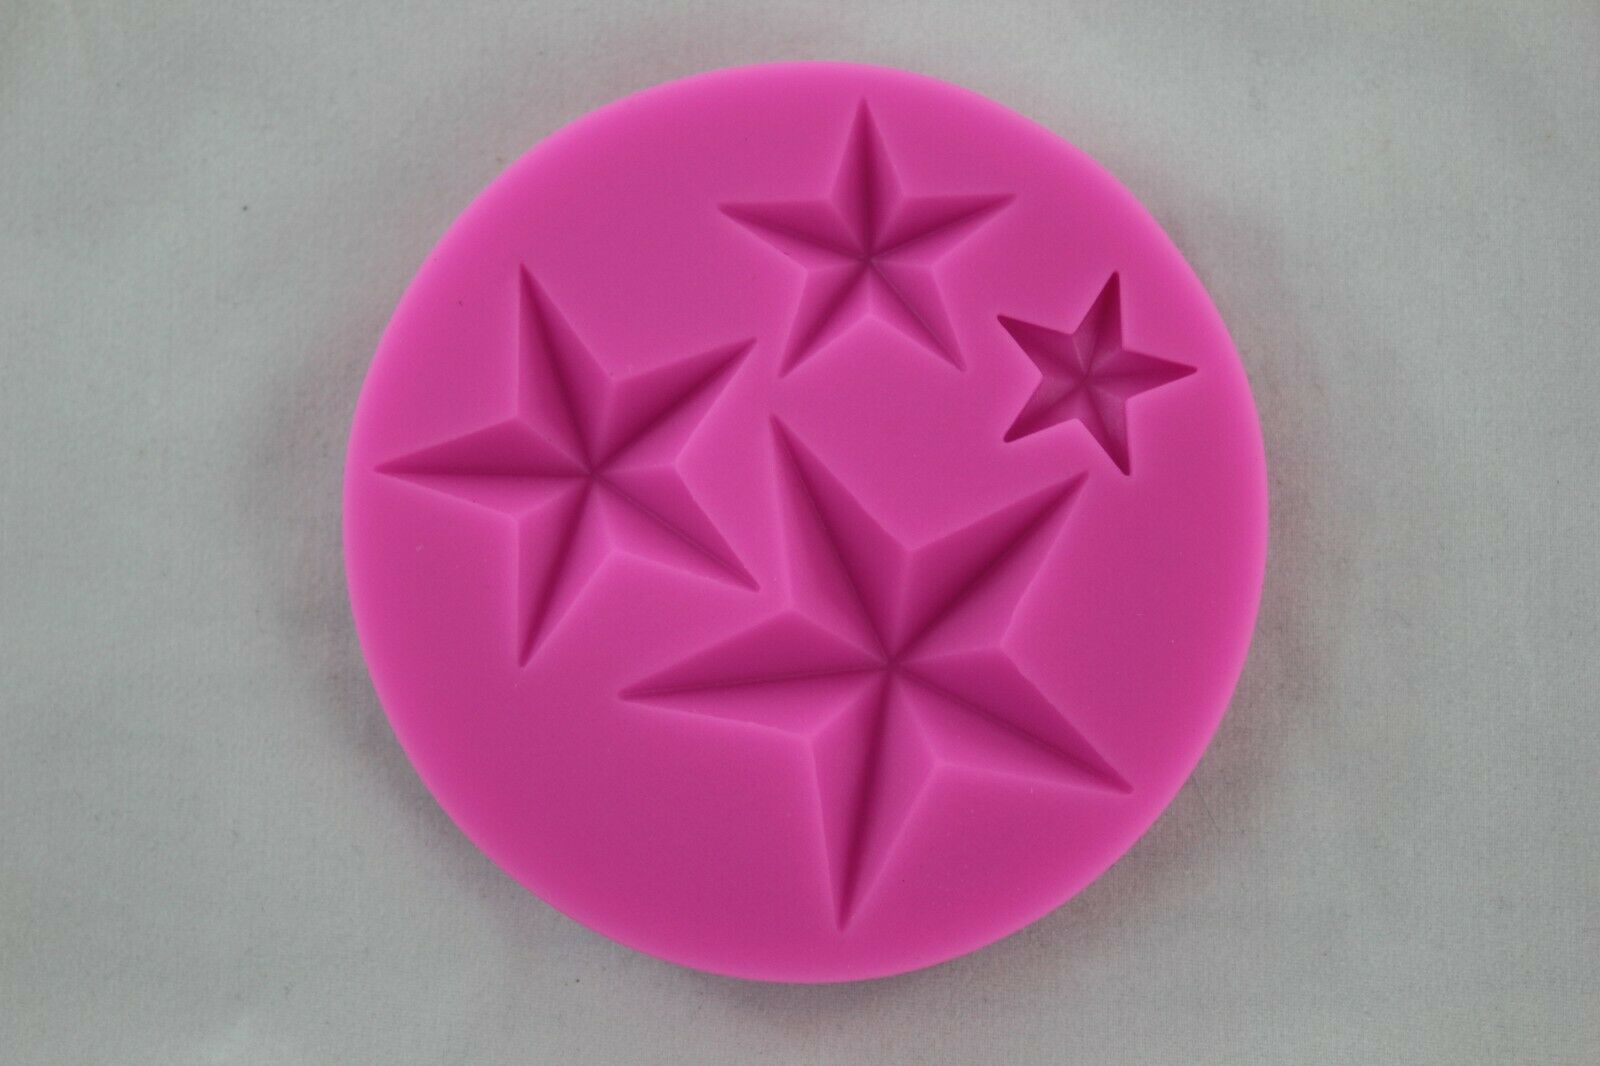 attachment-https://www.cupcakeaddicts.co.uk/wp-content/uploads/imported/5/Star-shapes-Silicone-mould-sugarcraft-baking-cake-decorating-fondant-chocolate-323779810625.jpg